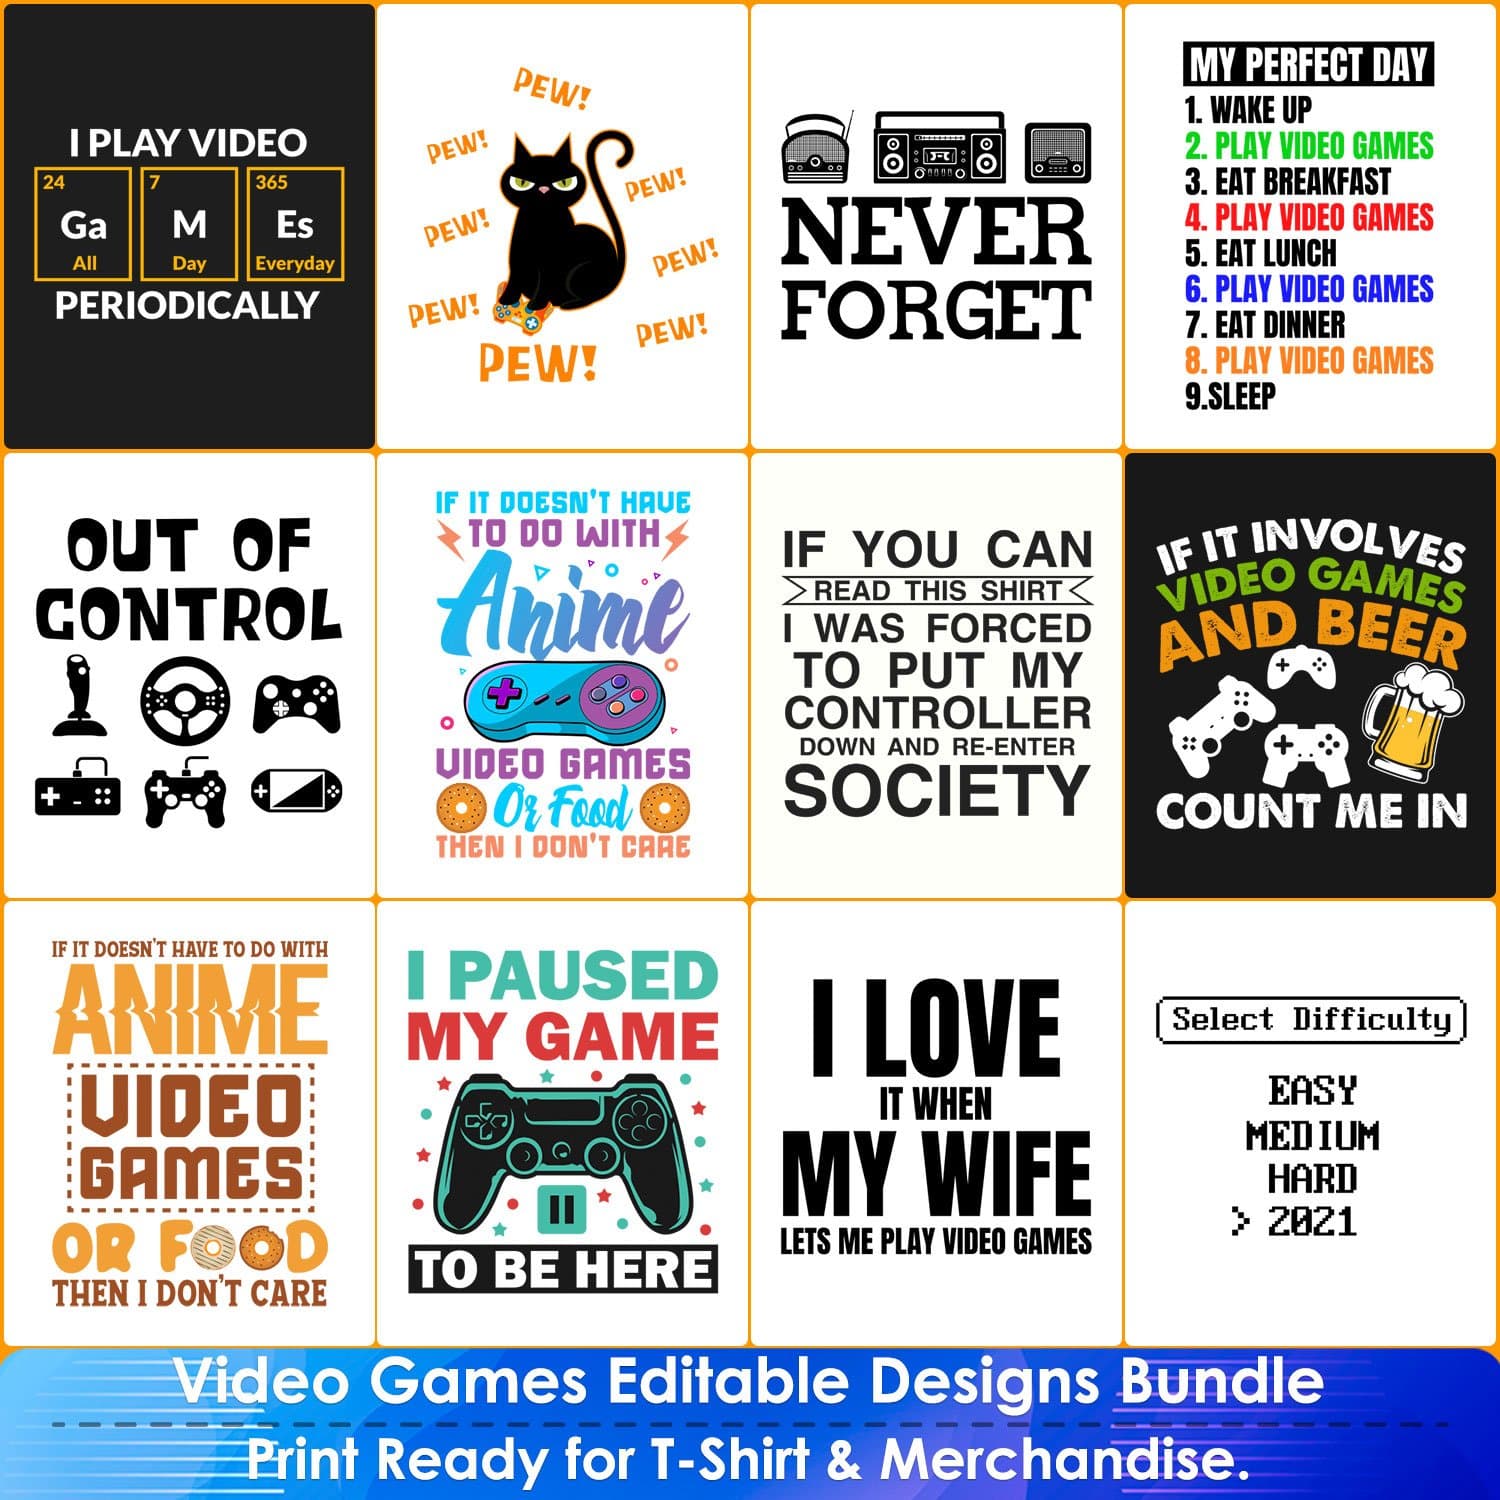 12 editable and scalable video game designs for t shirts or merch